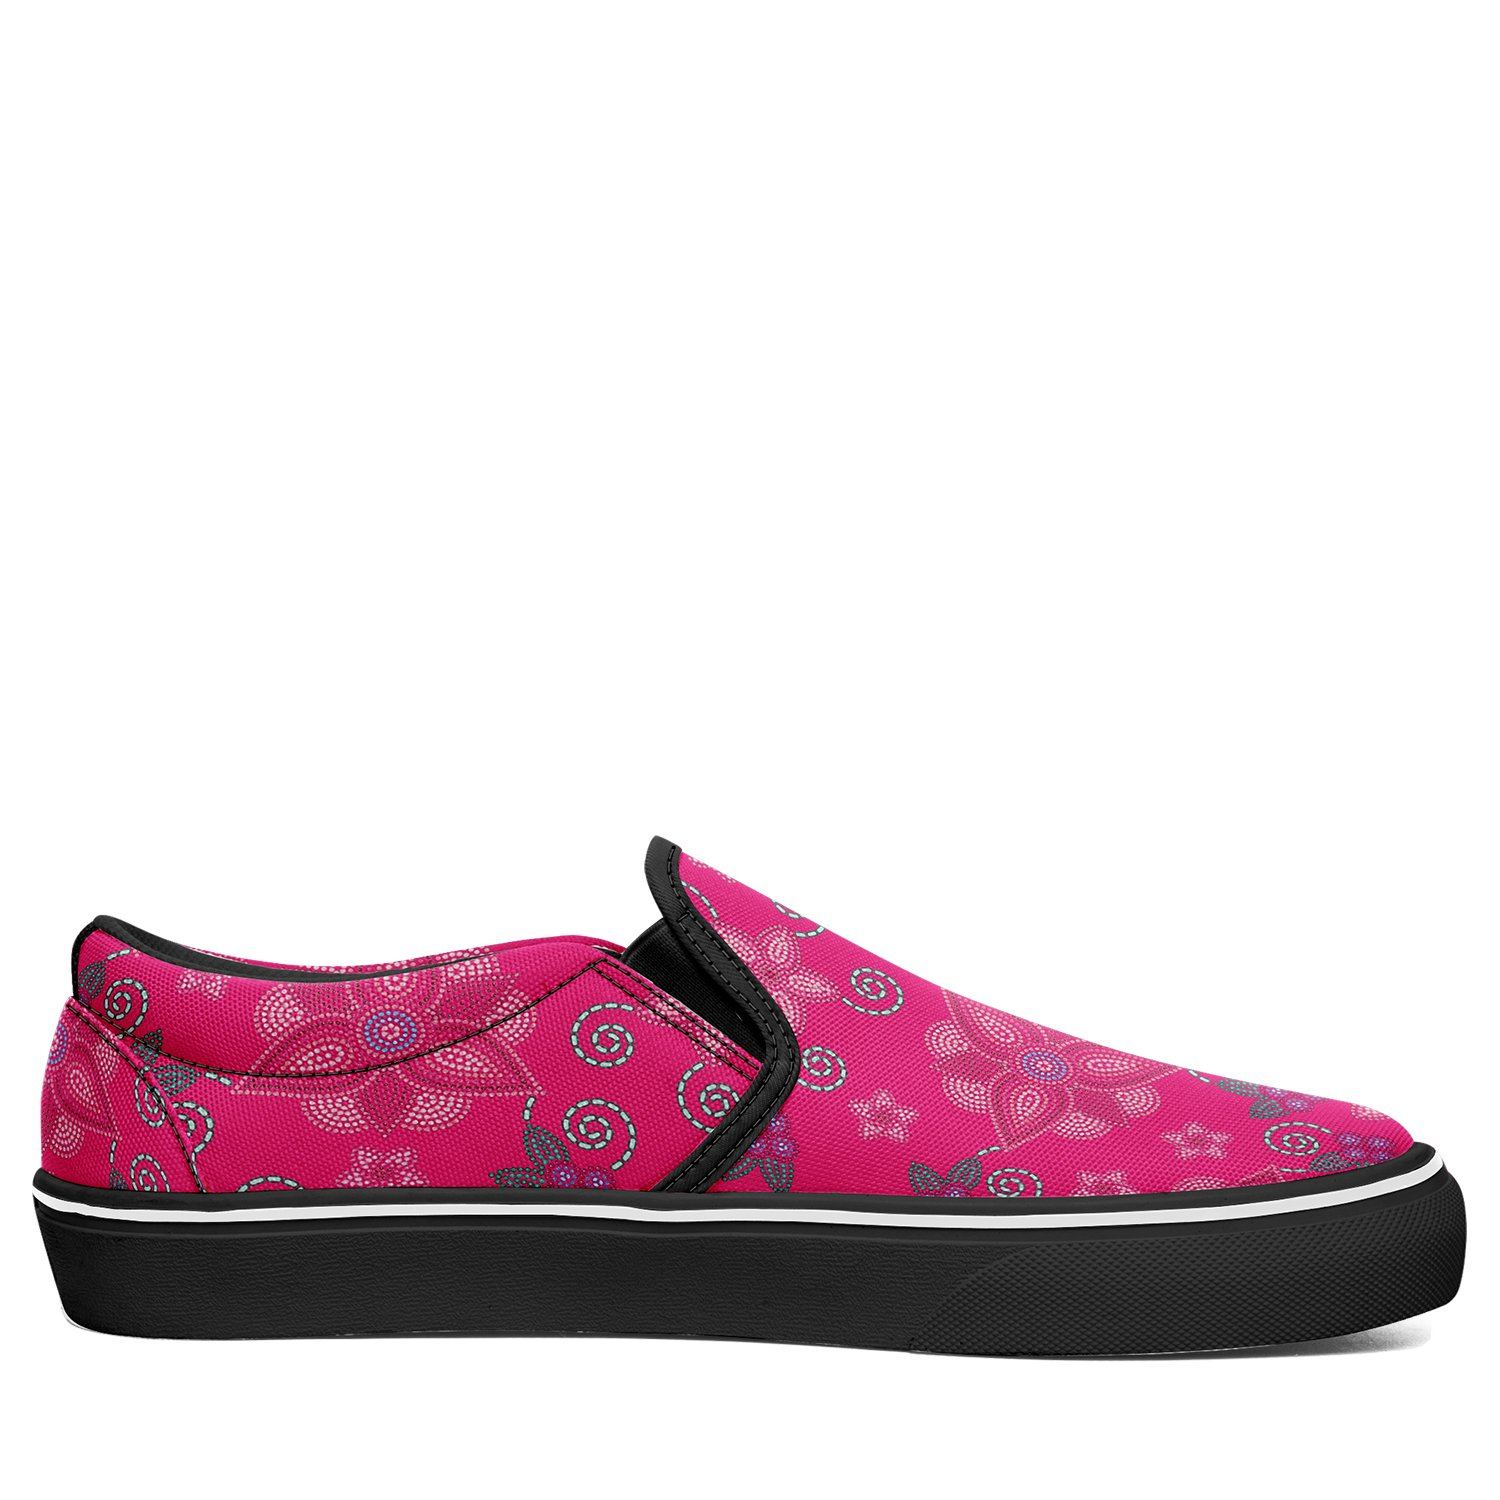 On Otoyimm Kids Shoes Slip Canvas